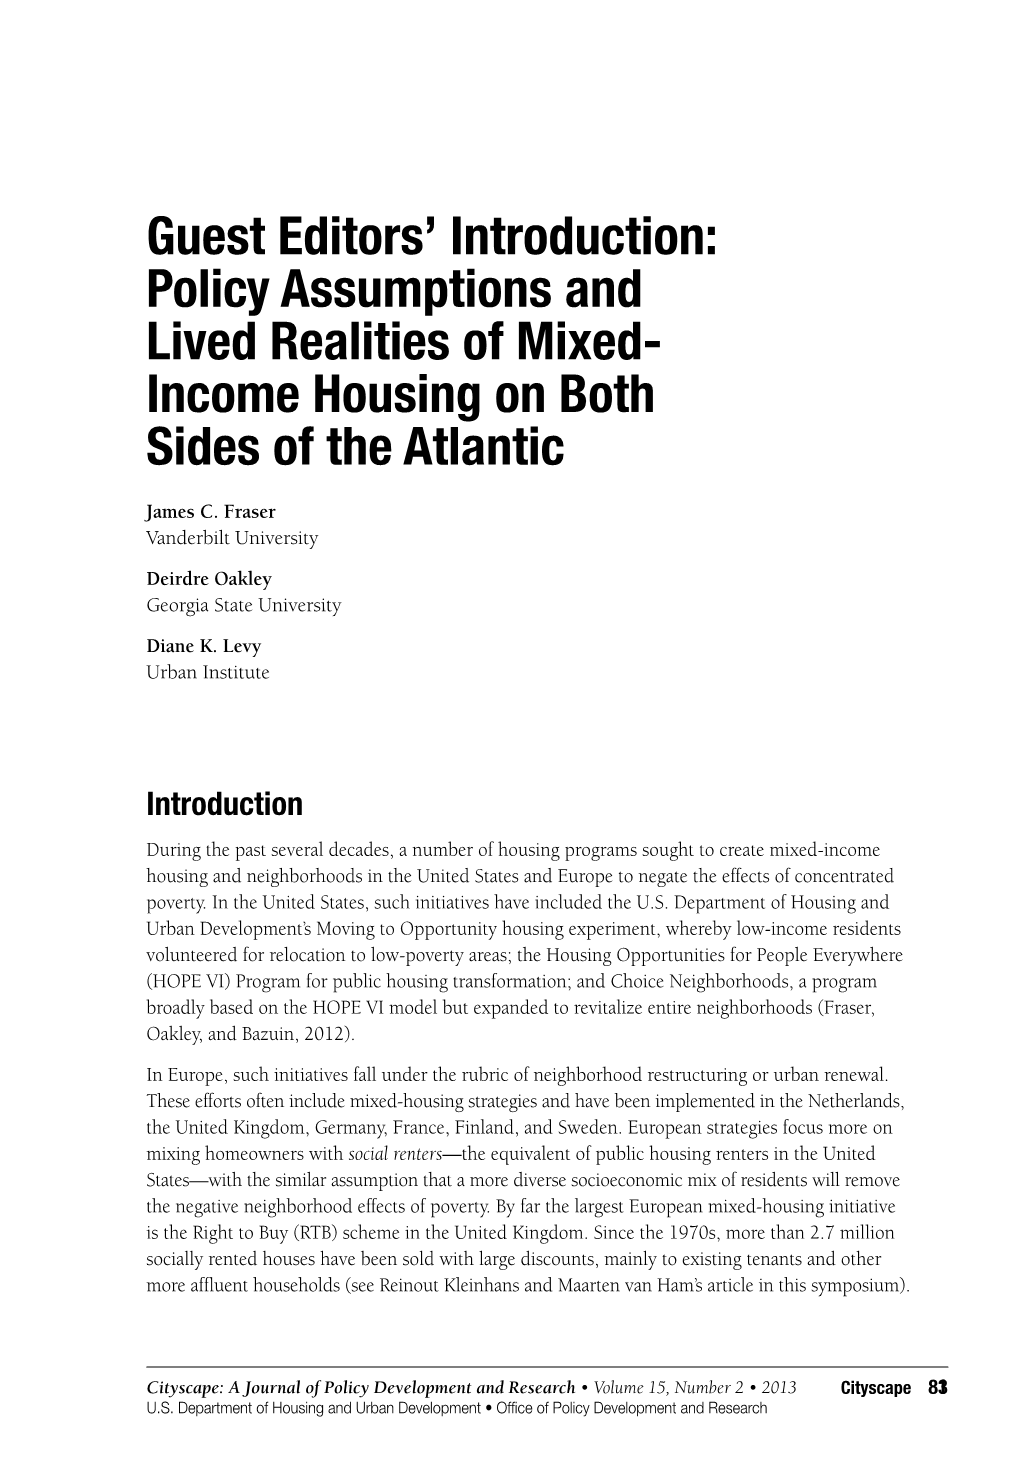 Guest Editors' Introduction: Policy Assumptions and Lived Realities Of